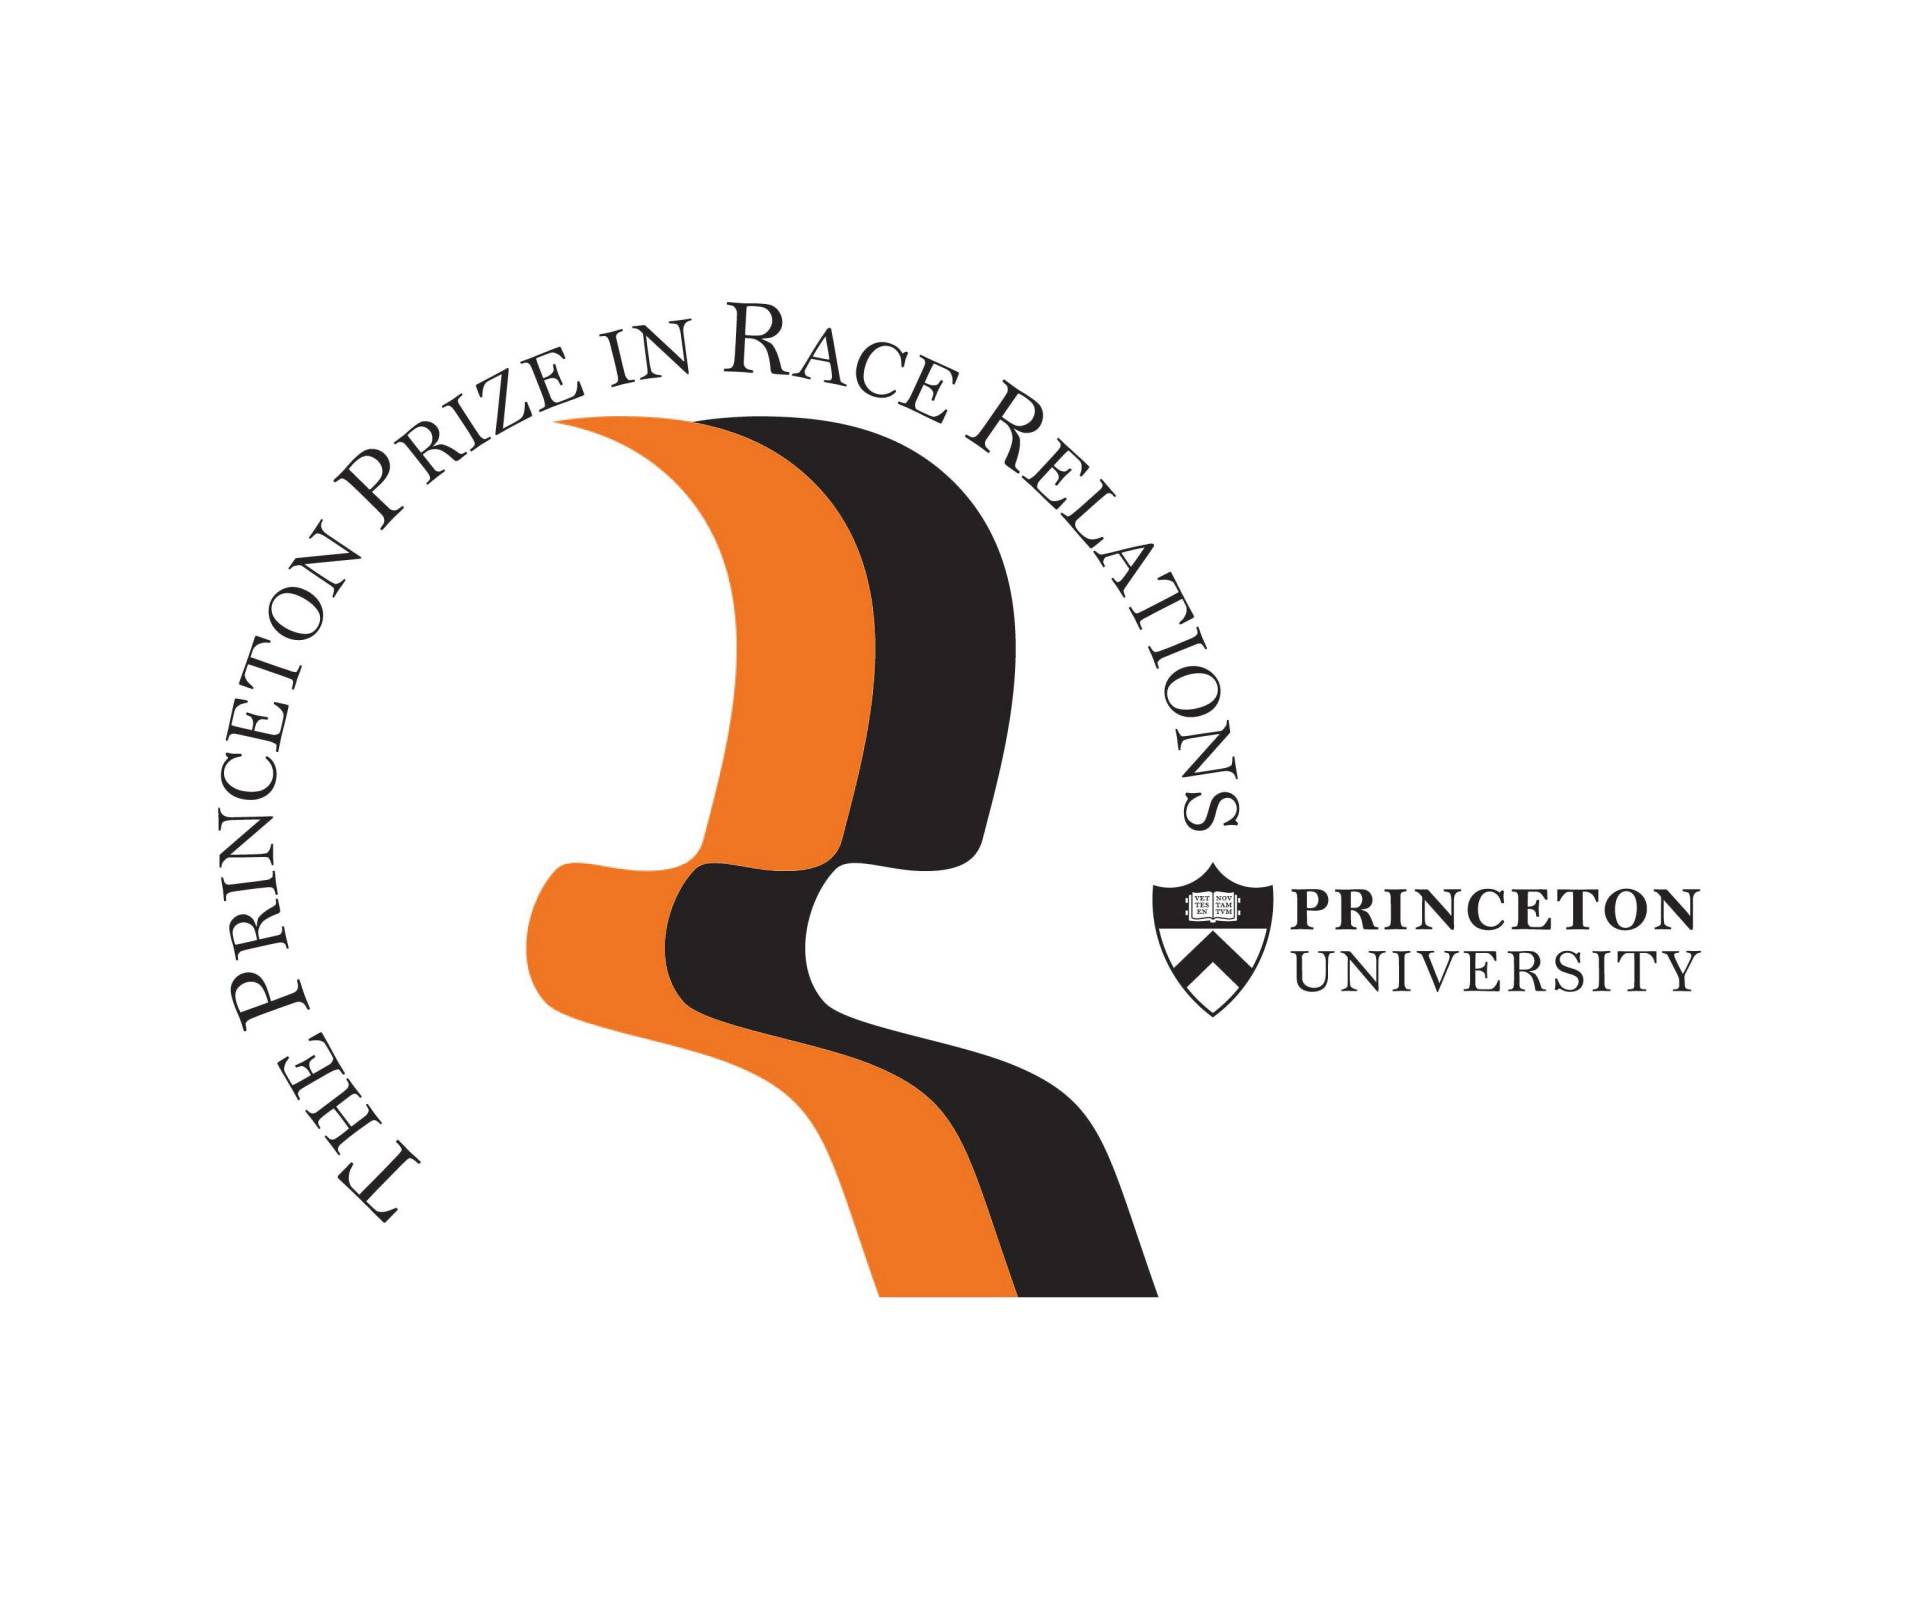 Princeton Prize in Race Relations logo